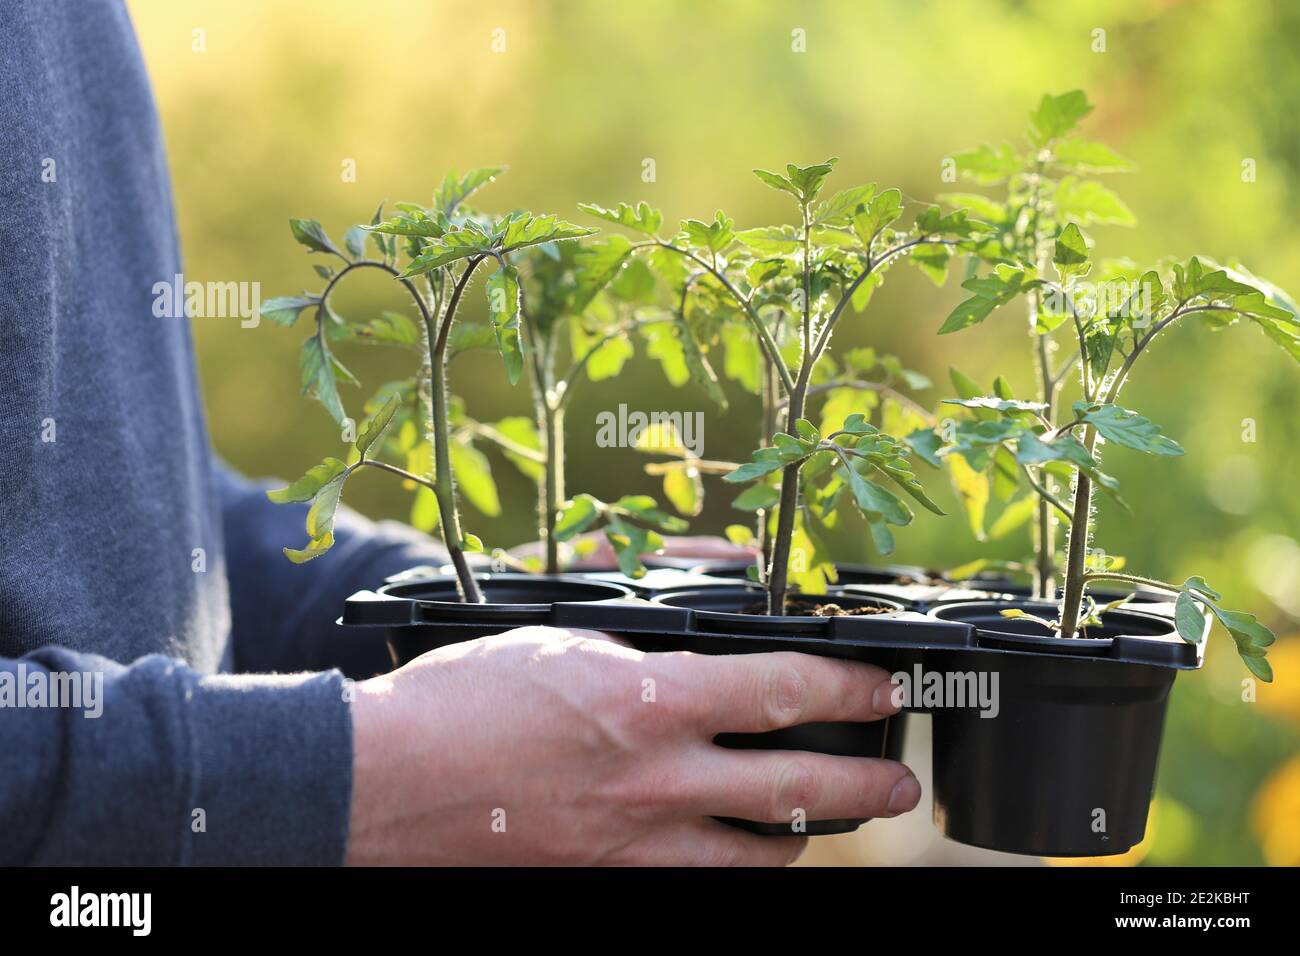 Spring seedlings. Gardening concept. Seedling tomatoes in cups in male hands on a green blurred spring garden background.Spring. Time of garden work Stock Photo